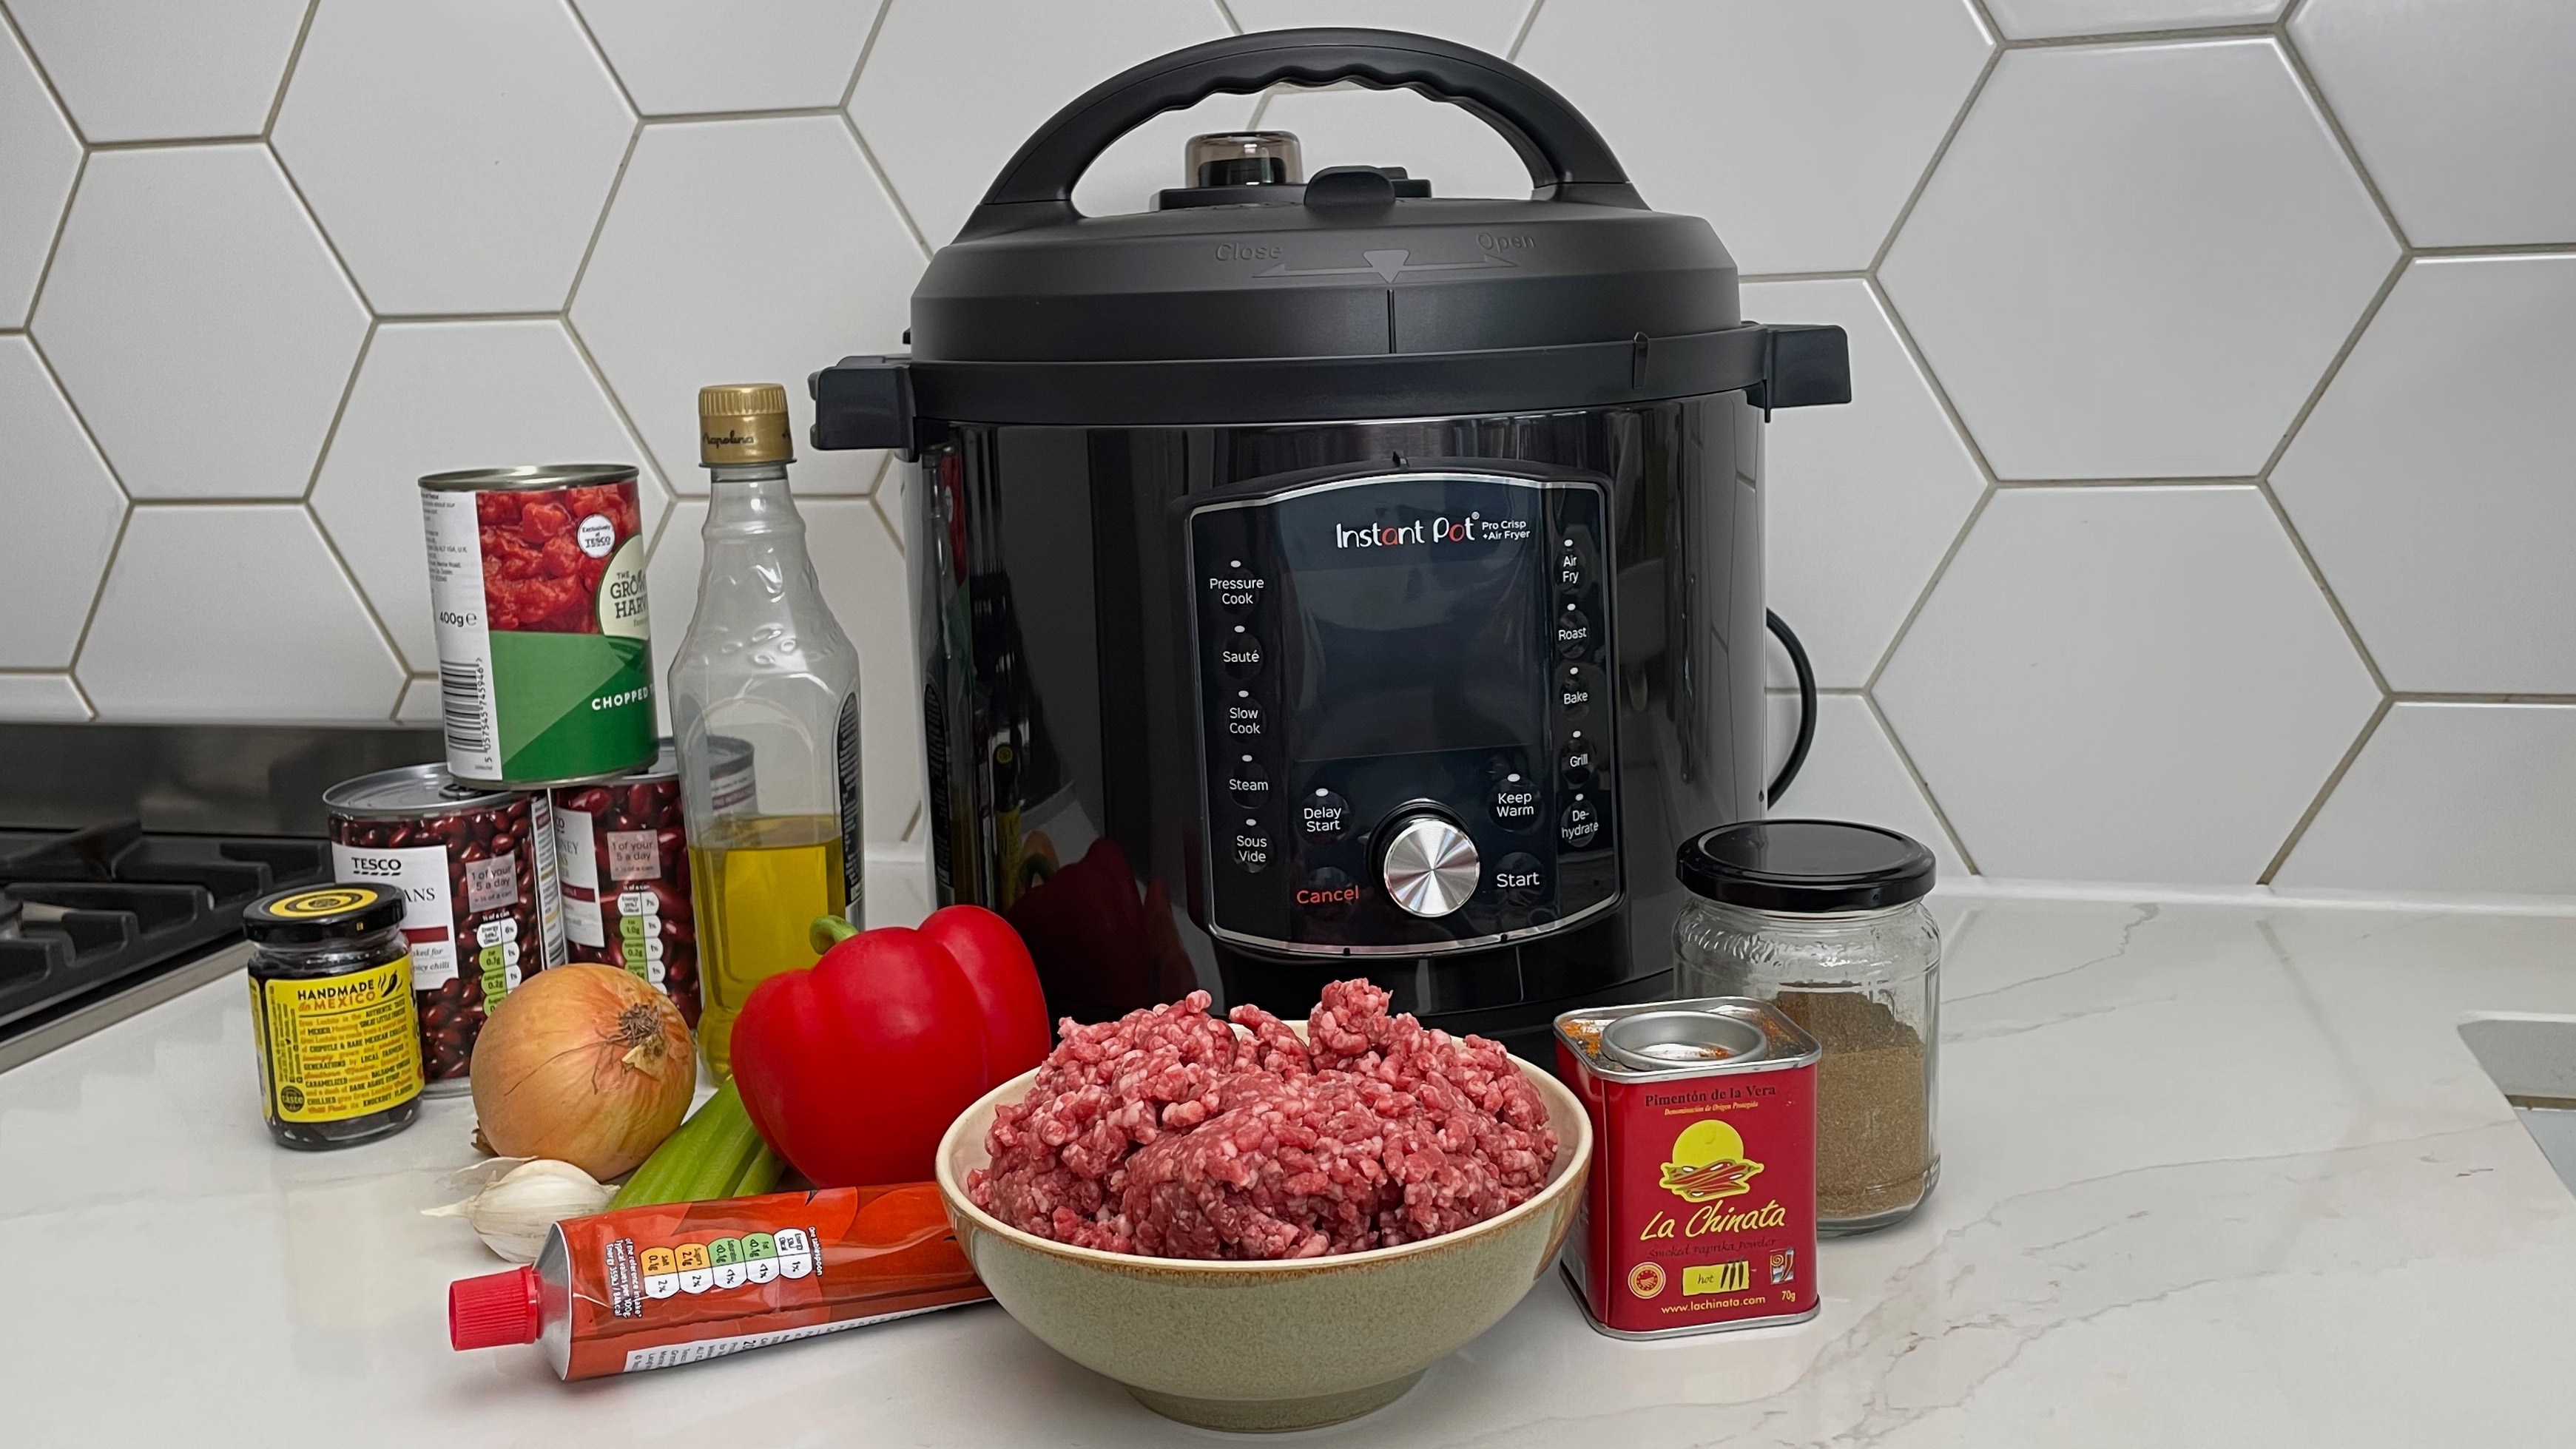 How Do Pressure Cookers Work? The Science Behind Them